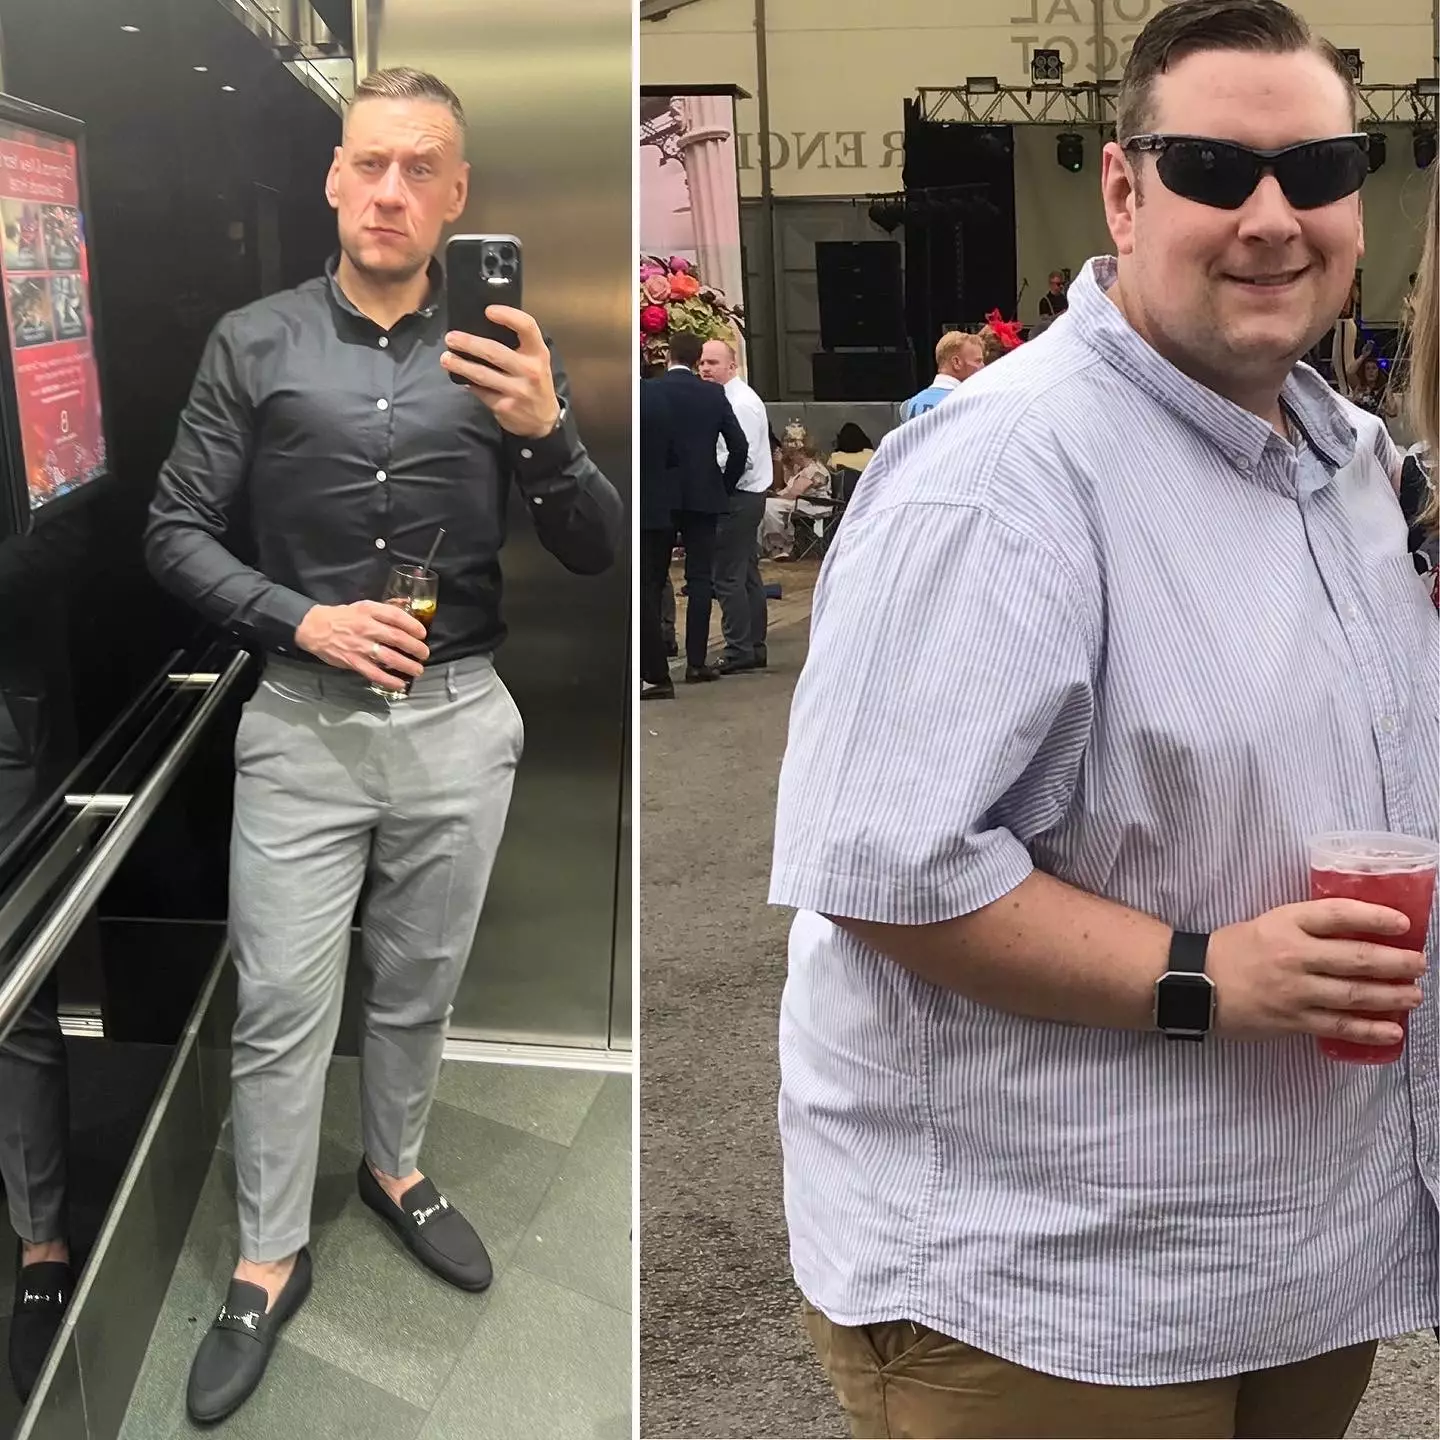 He dropped 14st after transforming his lifestyle.